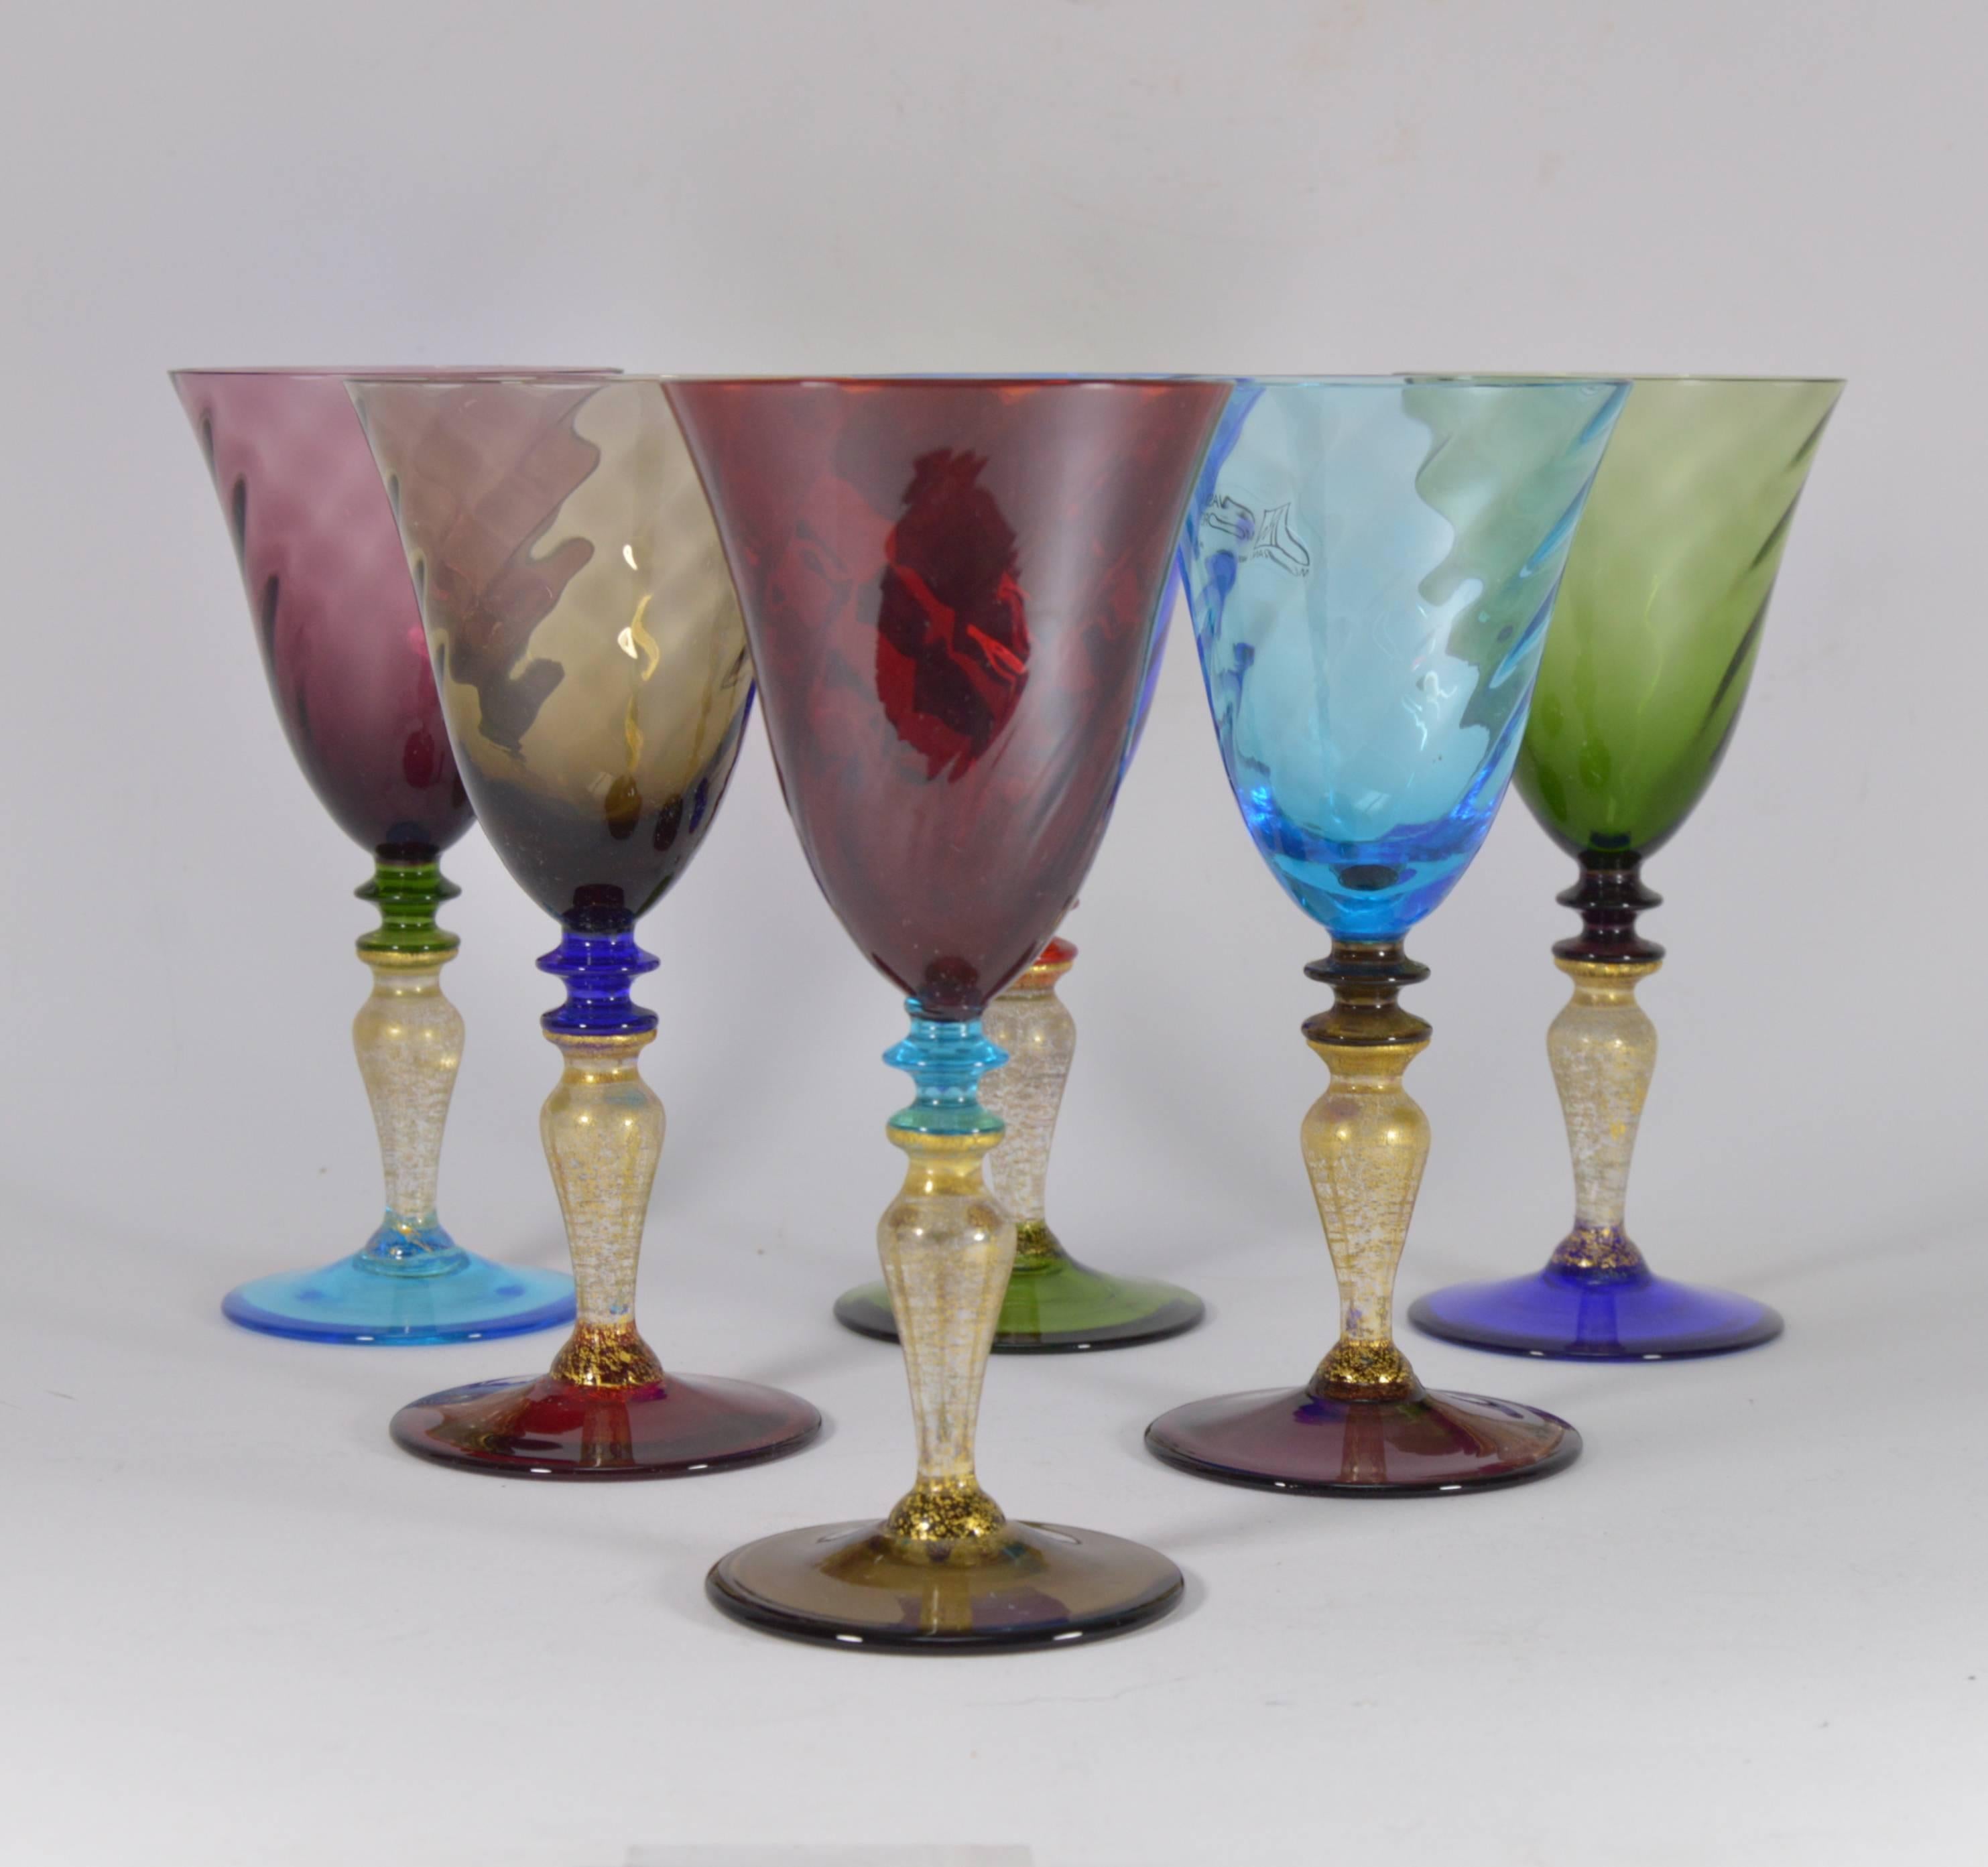 Set of six Murano Art glass wine glasses by Nason and Moretti. Gilt stems.
Perfect condition. Measures: Height 18.5 cm.